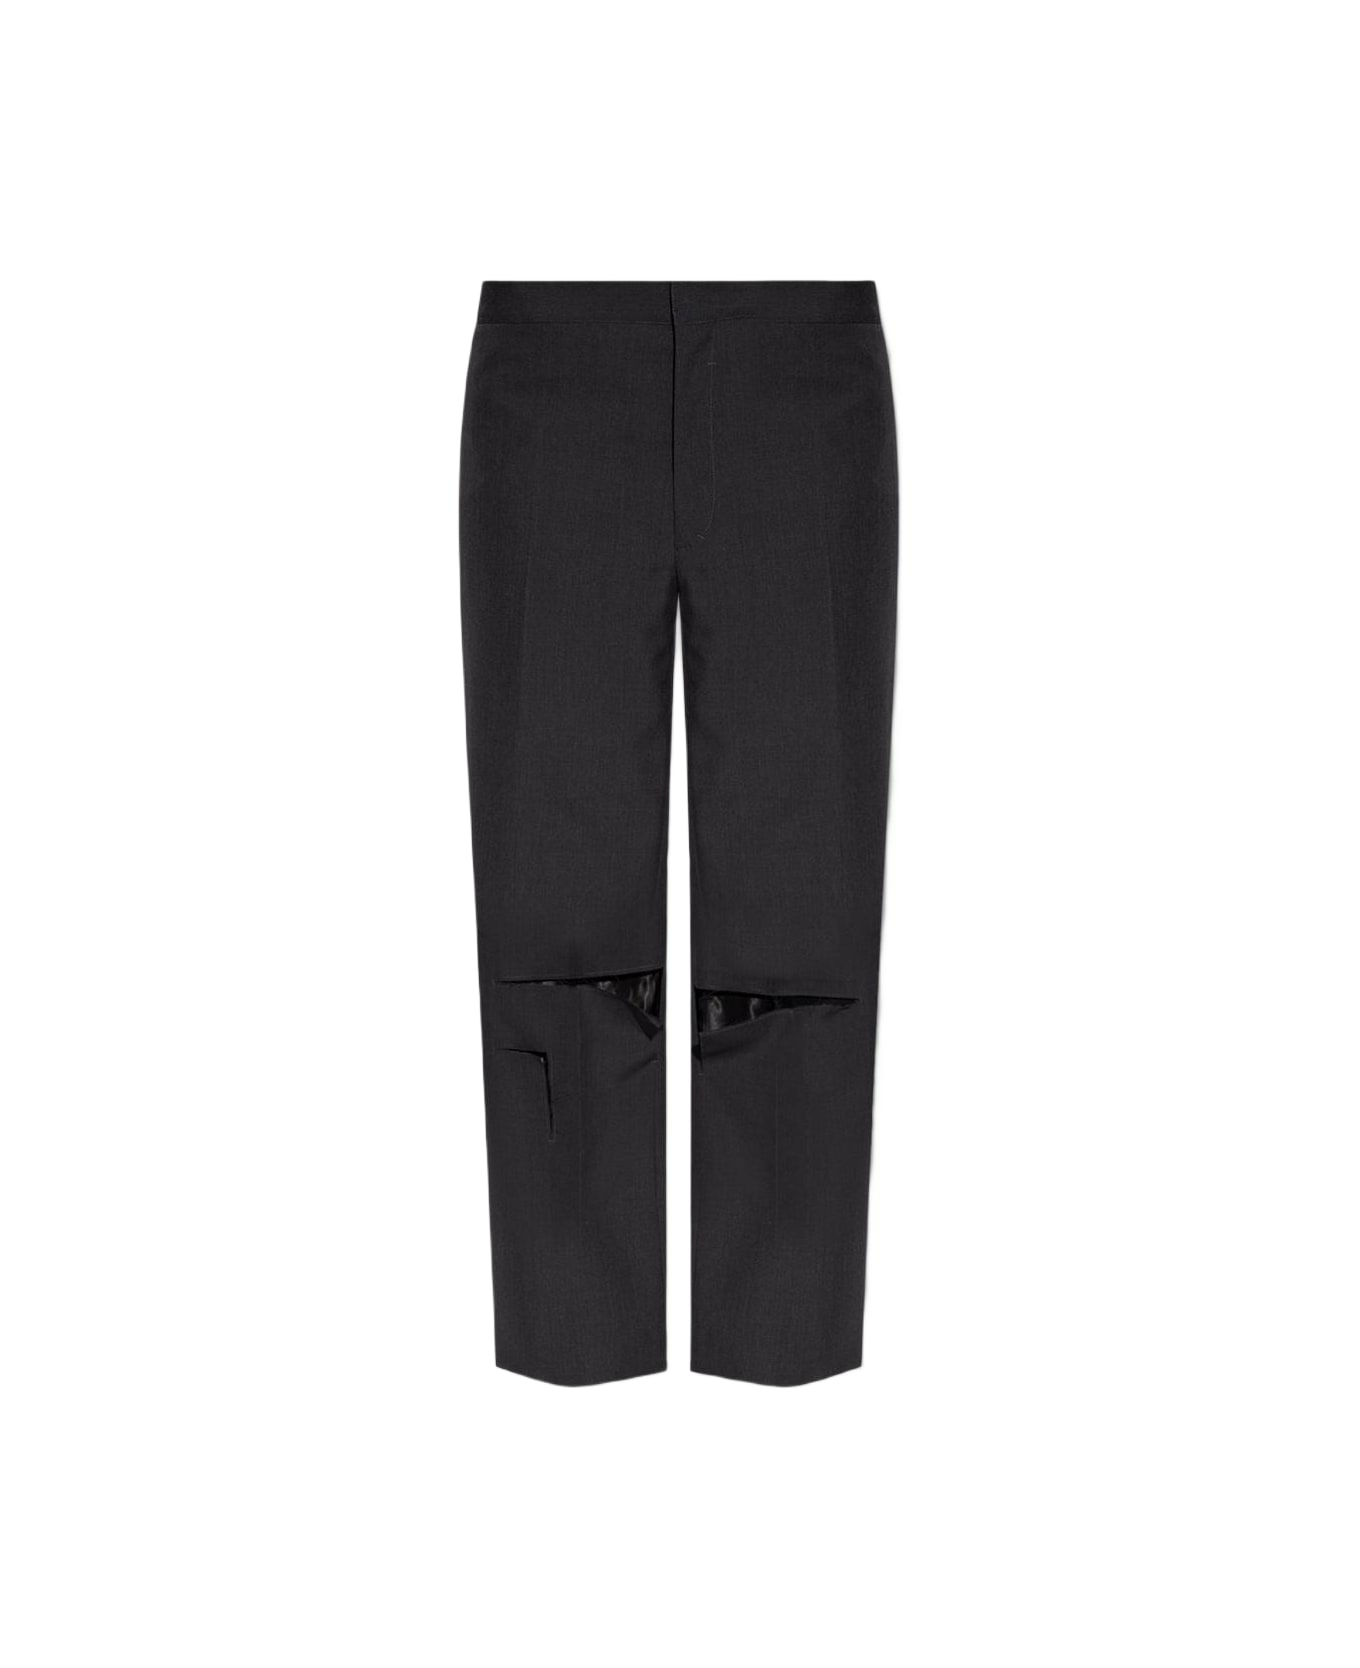 Givenchy Wool Trousers - GREY ボトムス